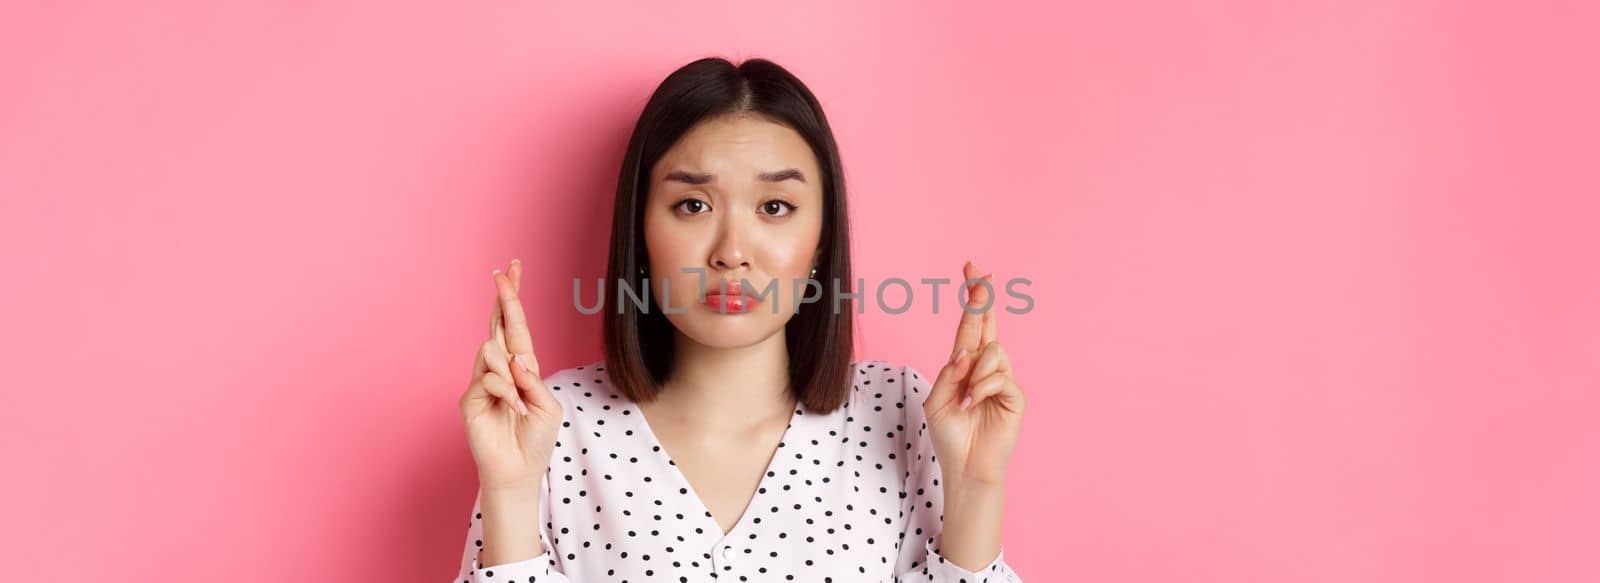 Beauty and lifestyle concept. Close-up of sad and hopeful asian woman making wish, cross fingers good luck and pouting, looking upset, standing over pink background.